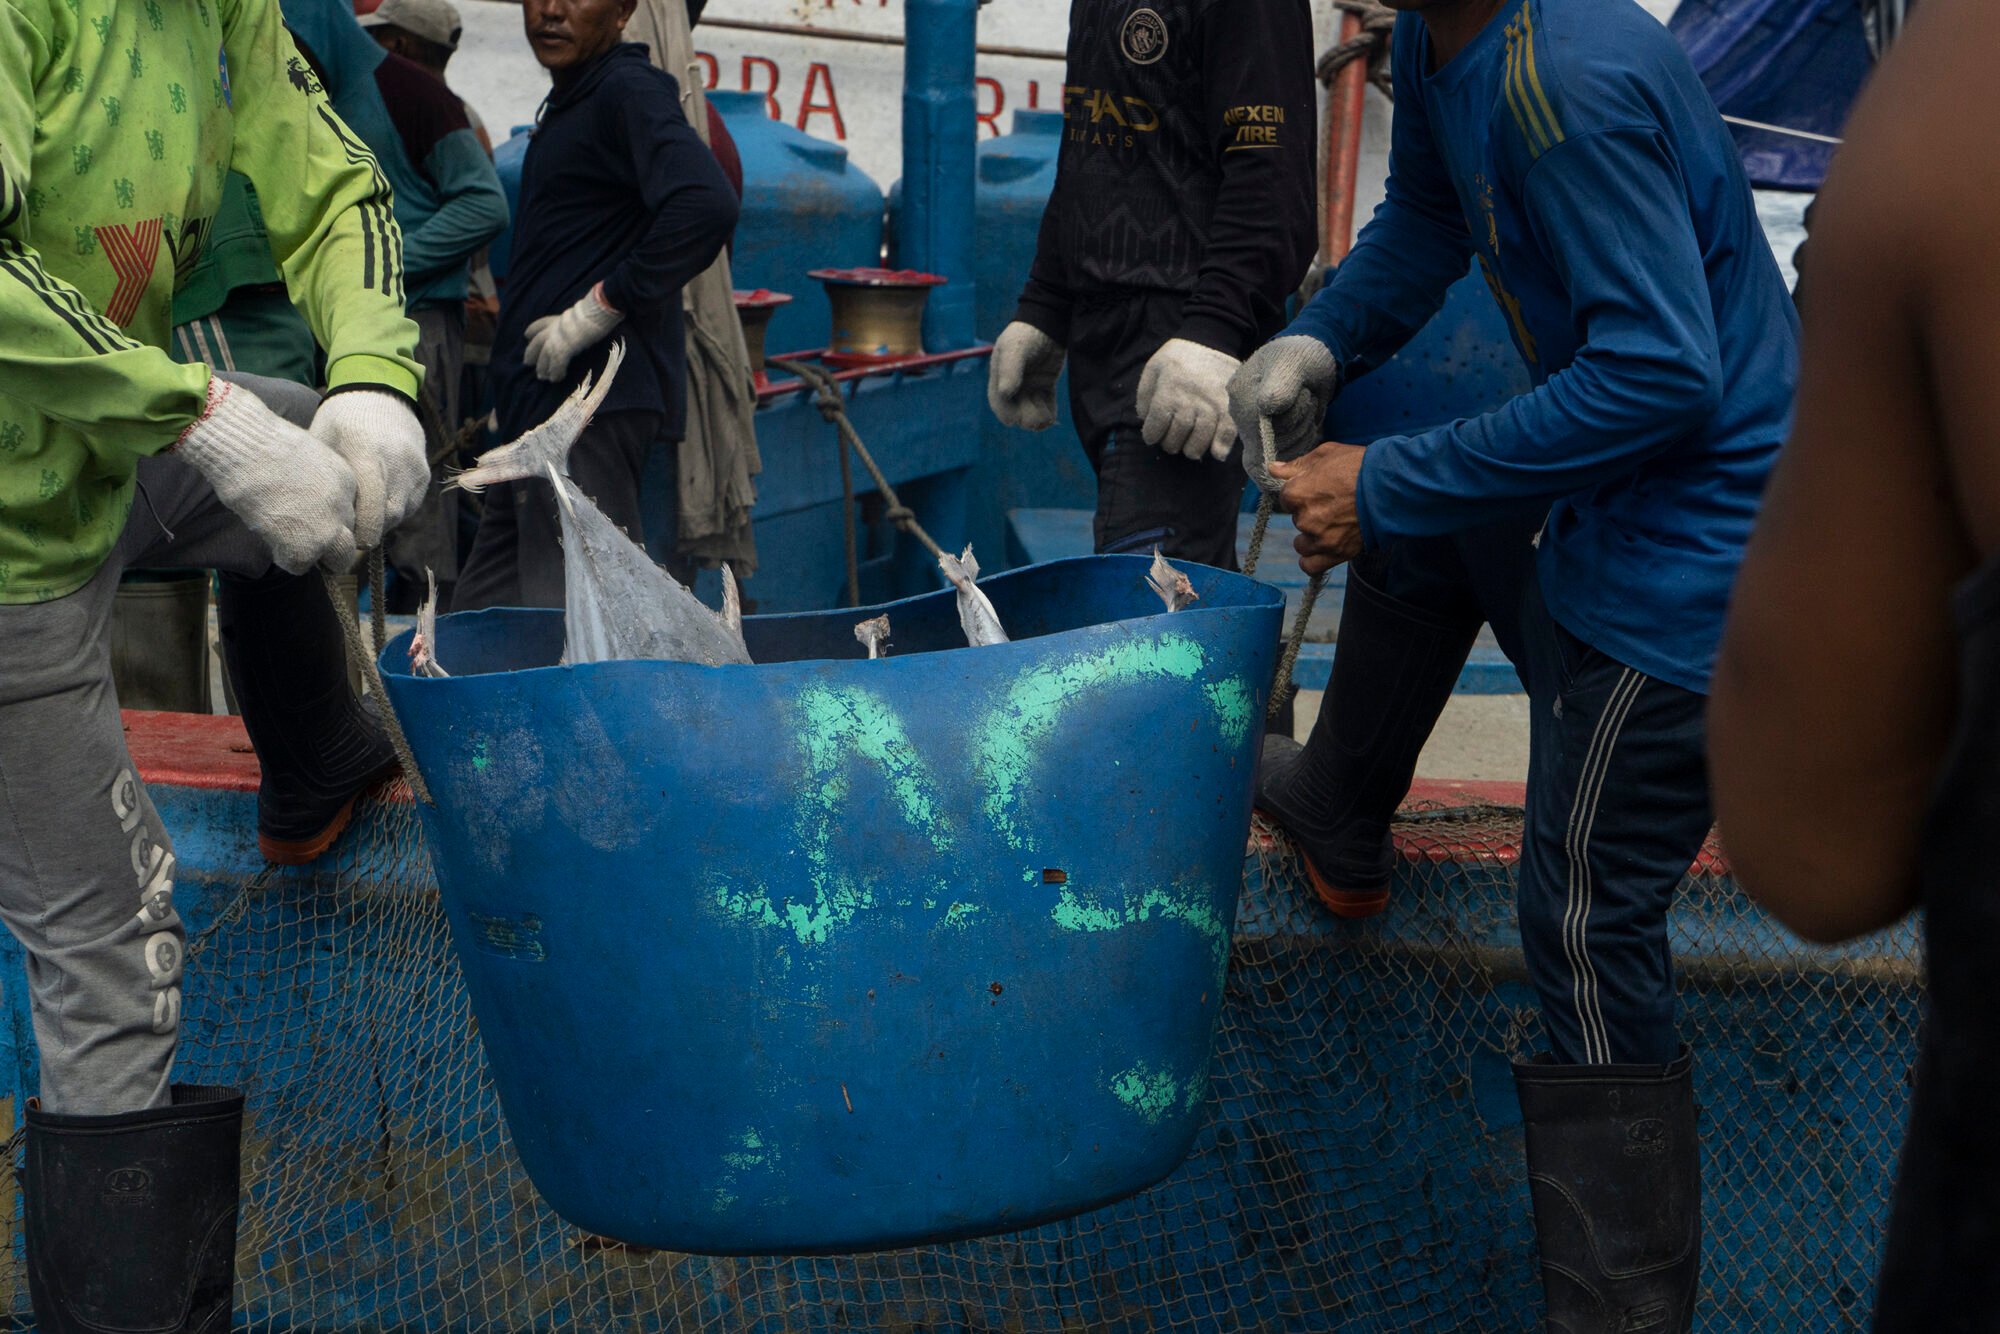 Workers on an industrial fishing vessel unload buckets of frozen skipjack tuna at the port of Benoa in Bali. Business licences are mandatory for vessels like this to operate in Indonesian waters